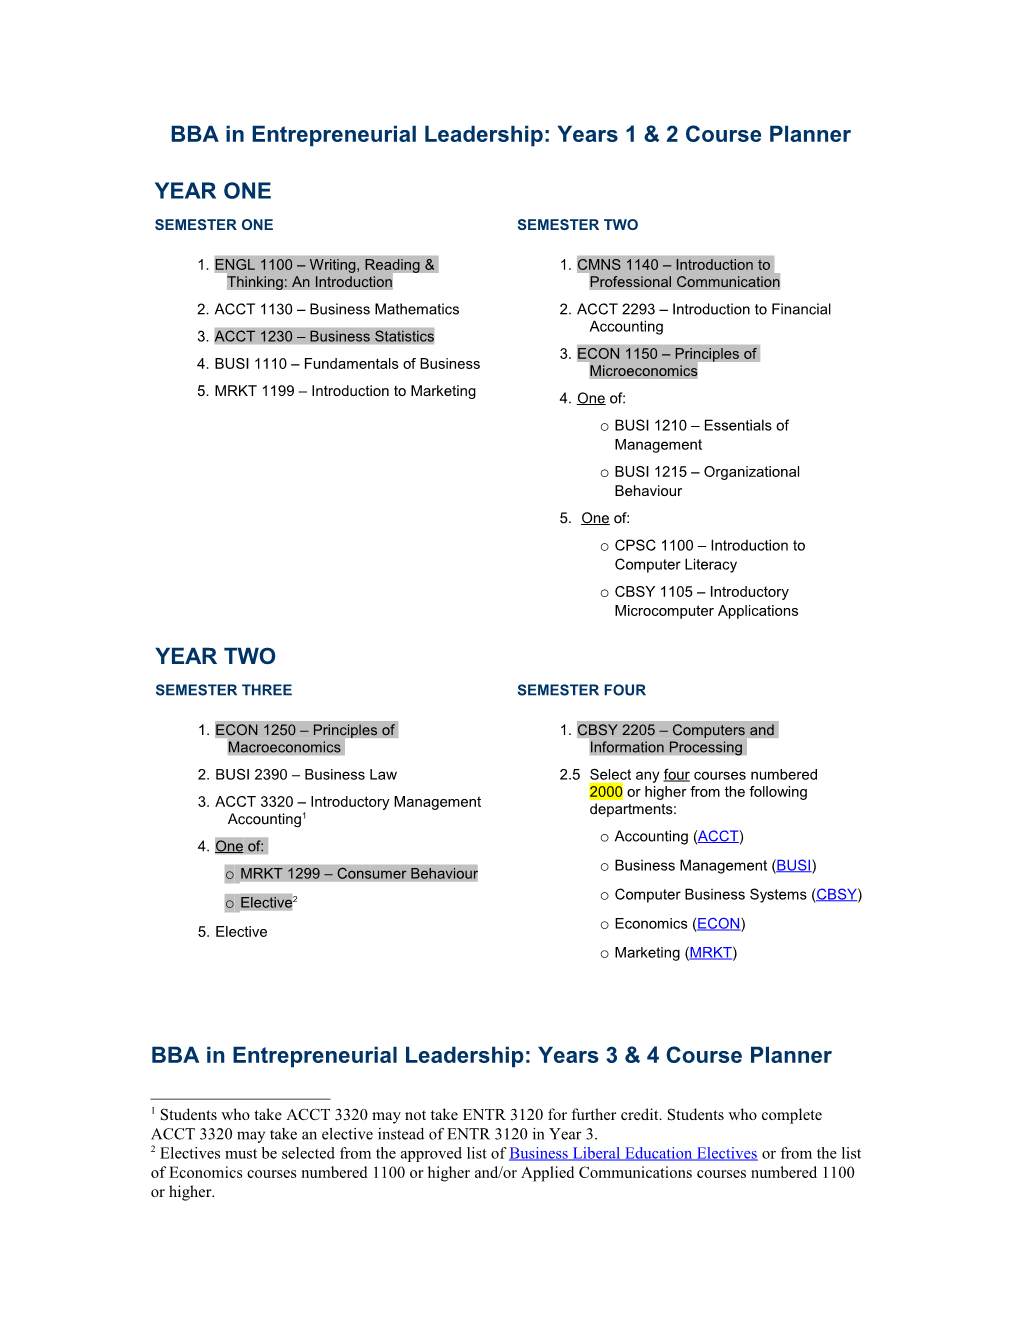 BBA in Entrepreneurial Leadership: Years 1 & 2 Course Planner